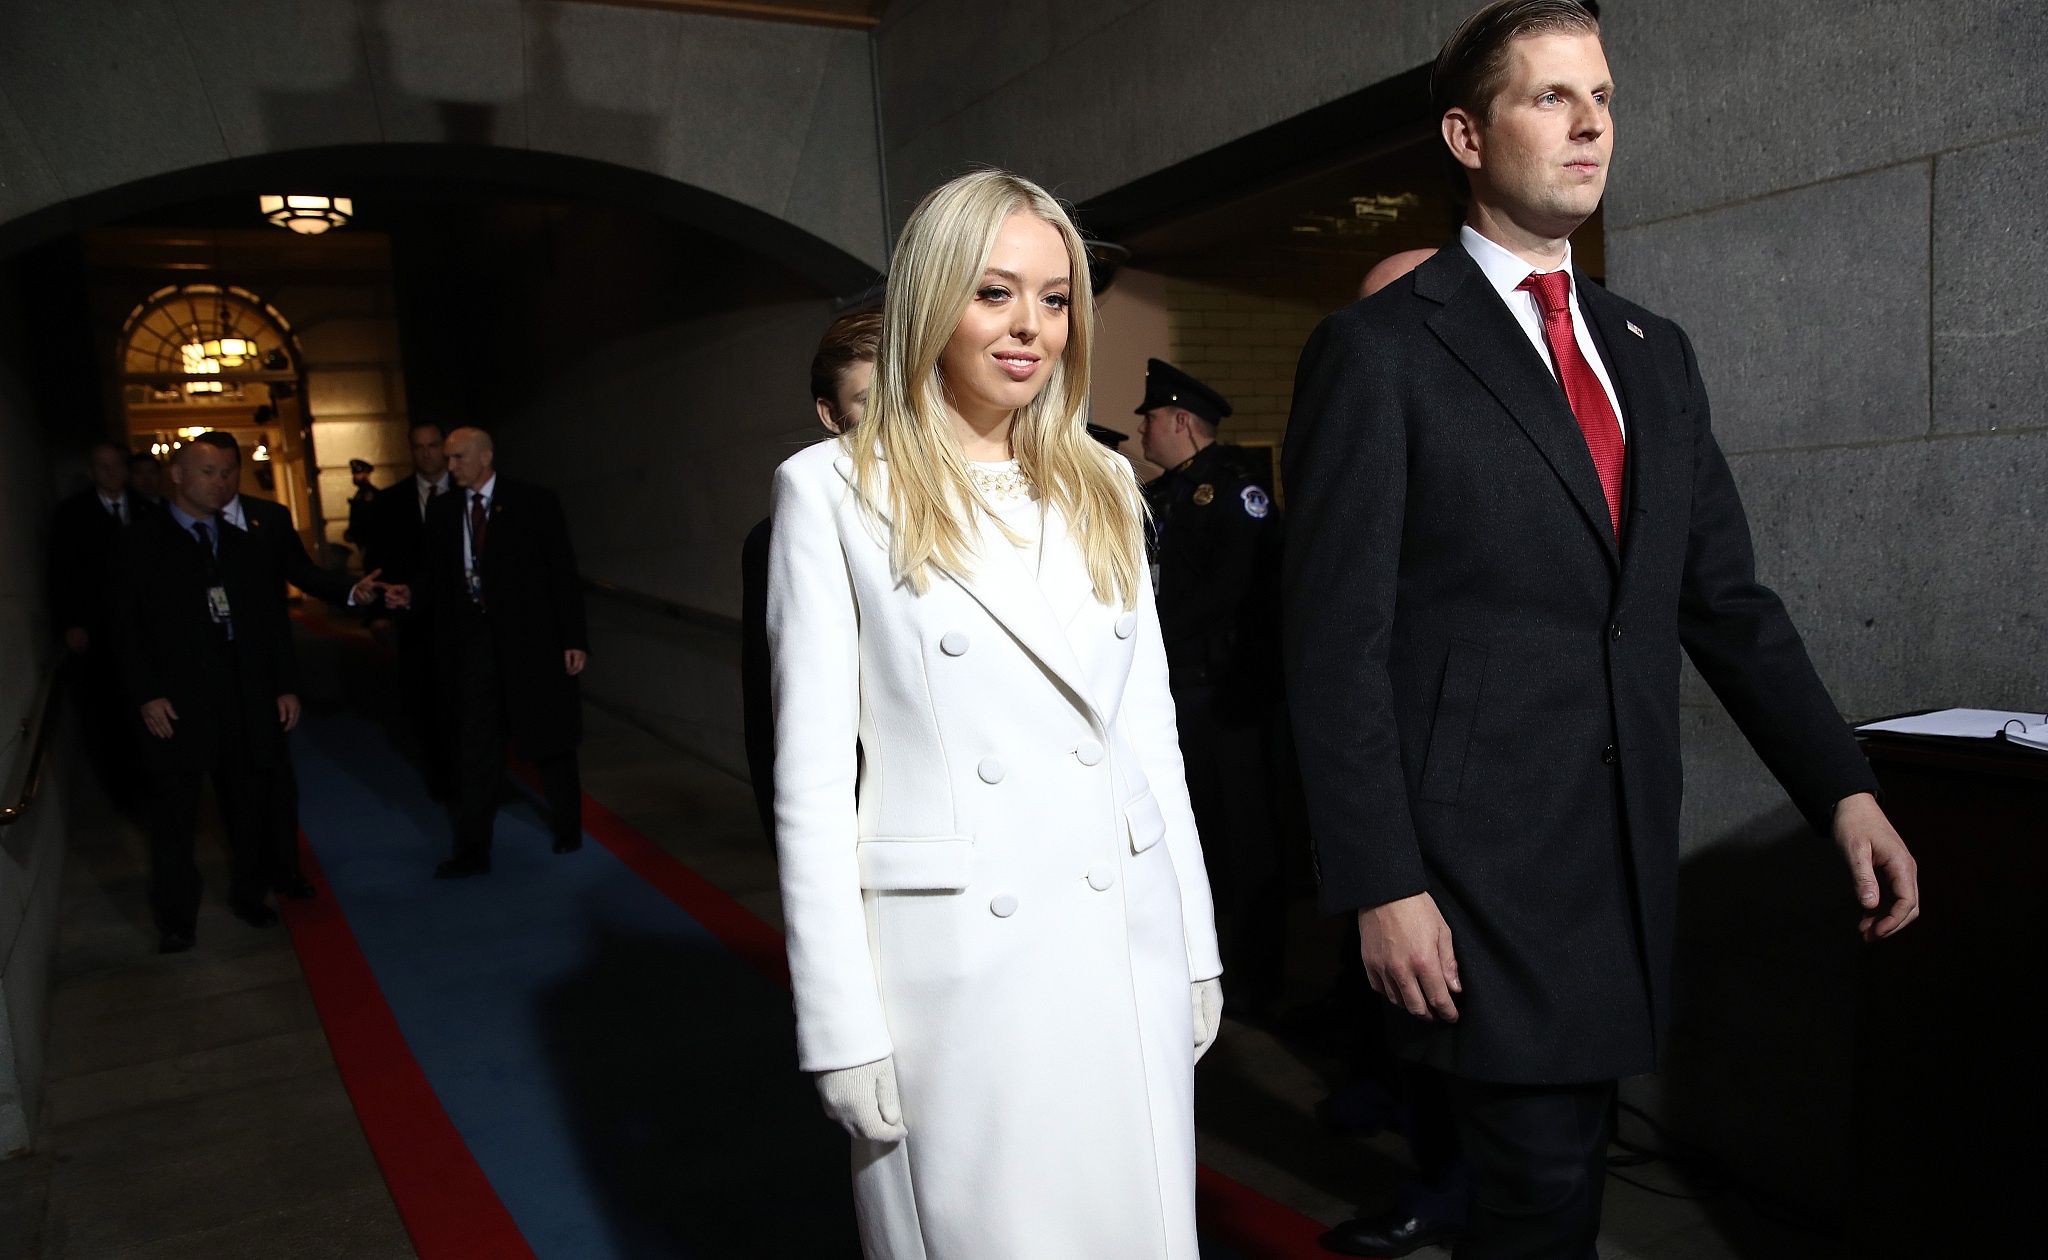 "First Daughter" Tiffany Trump wore the white coat designed by Chinese fashion designer Wang Tao during the inauguration ceremony when Donald J. Trump becomes the 45th president of the United States. (Image via VCG)